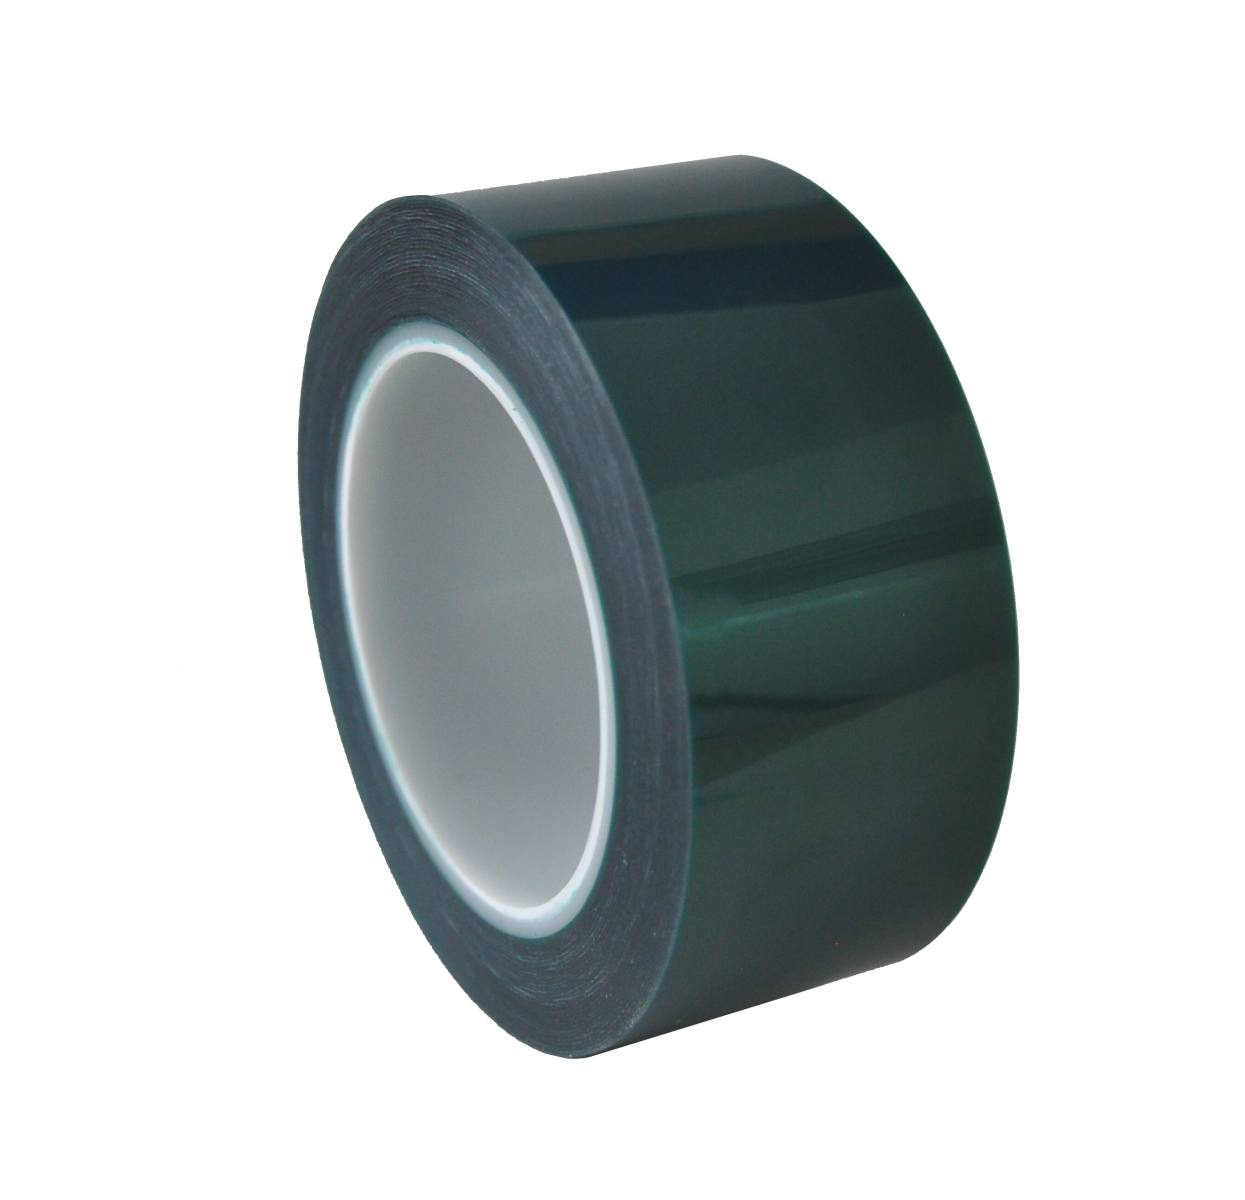 S-K-S 208G polyester adhesive tape, 25mmx66m, green